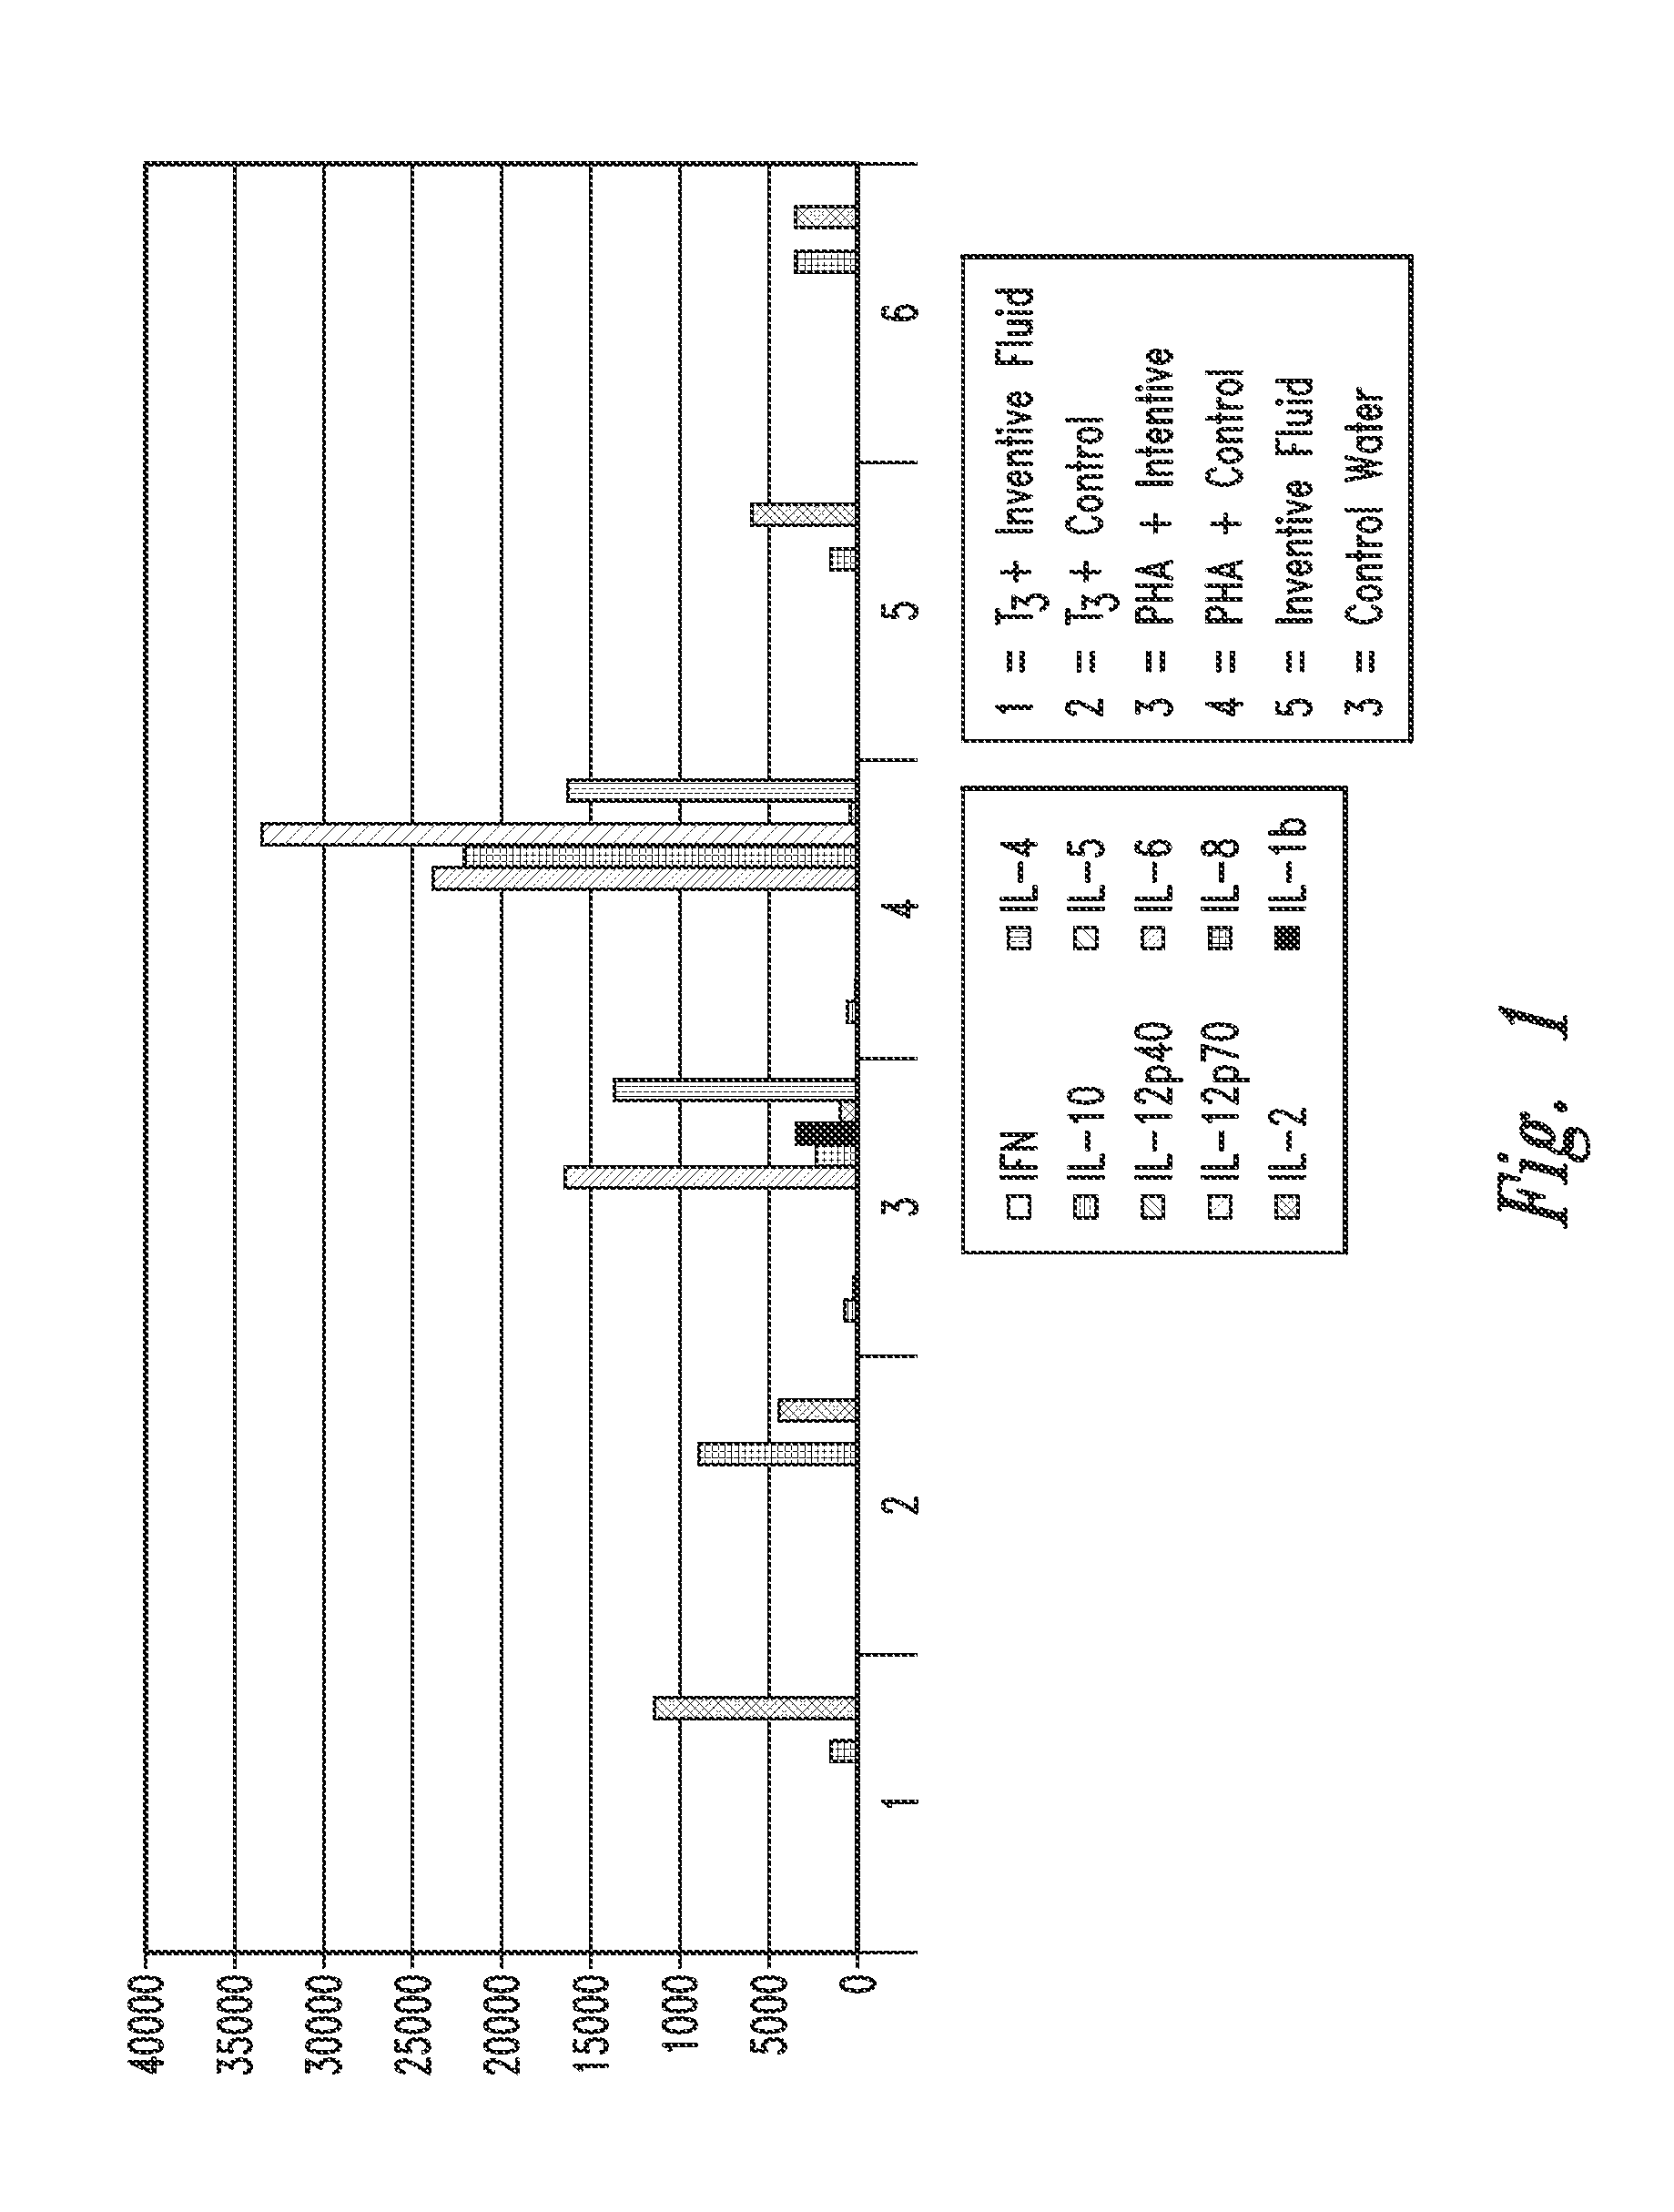 Compositions and methods for inhibiting and/or modulating effector t-cells involved in inflammatory neurodegenerative disease